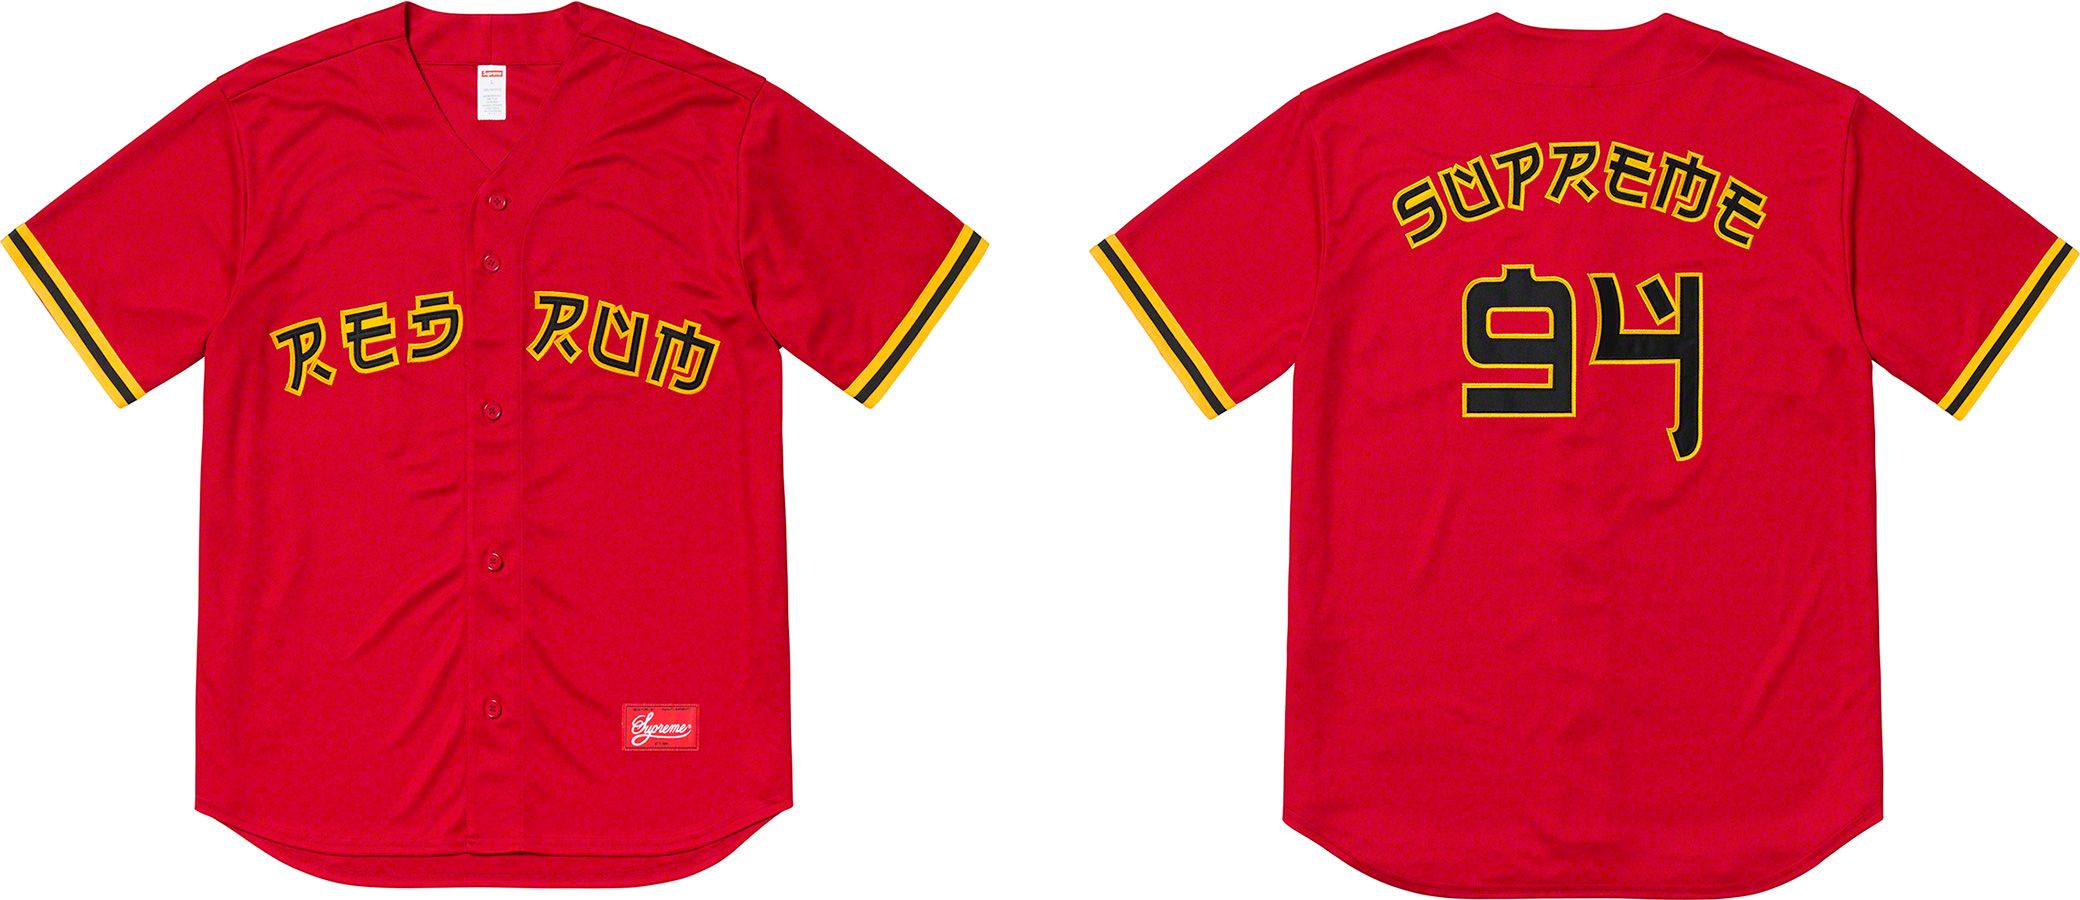 Red Rum Baseball Jersey - Spring/Summer 2019 Preview – Supreme